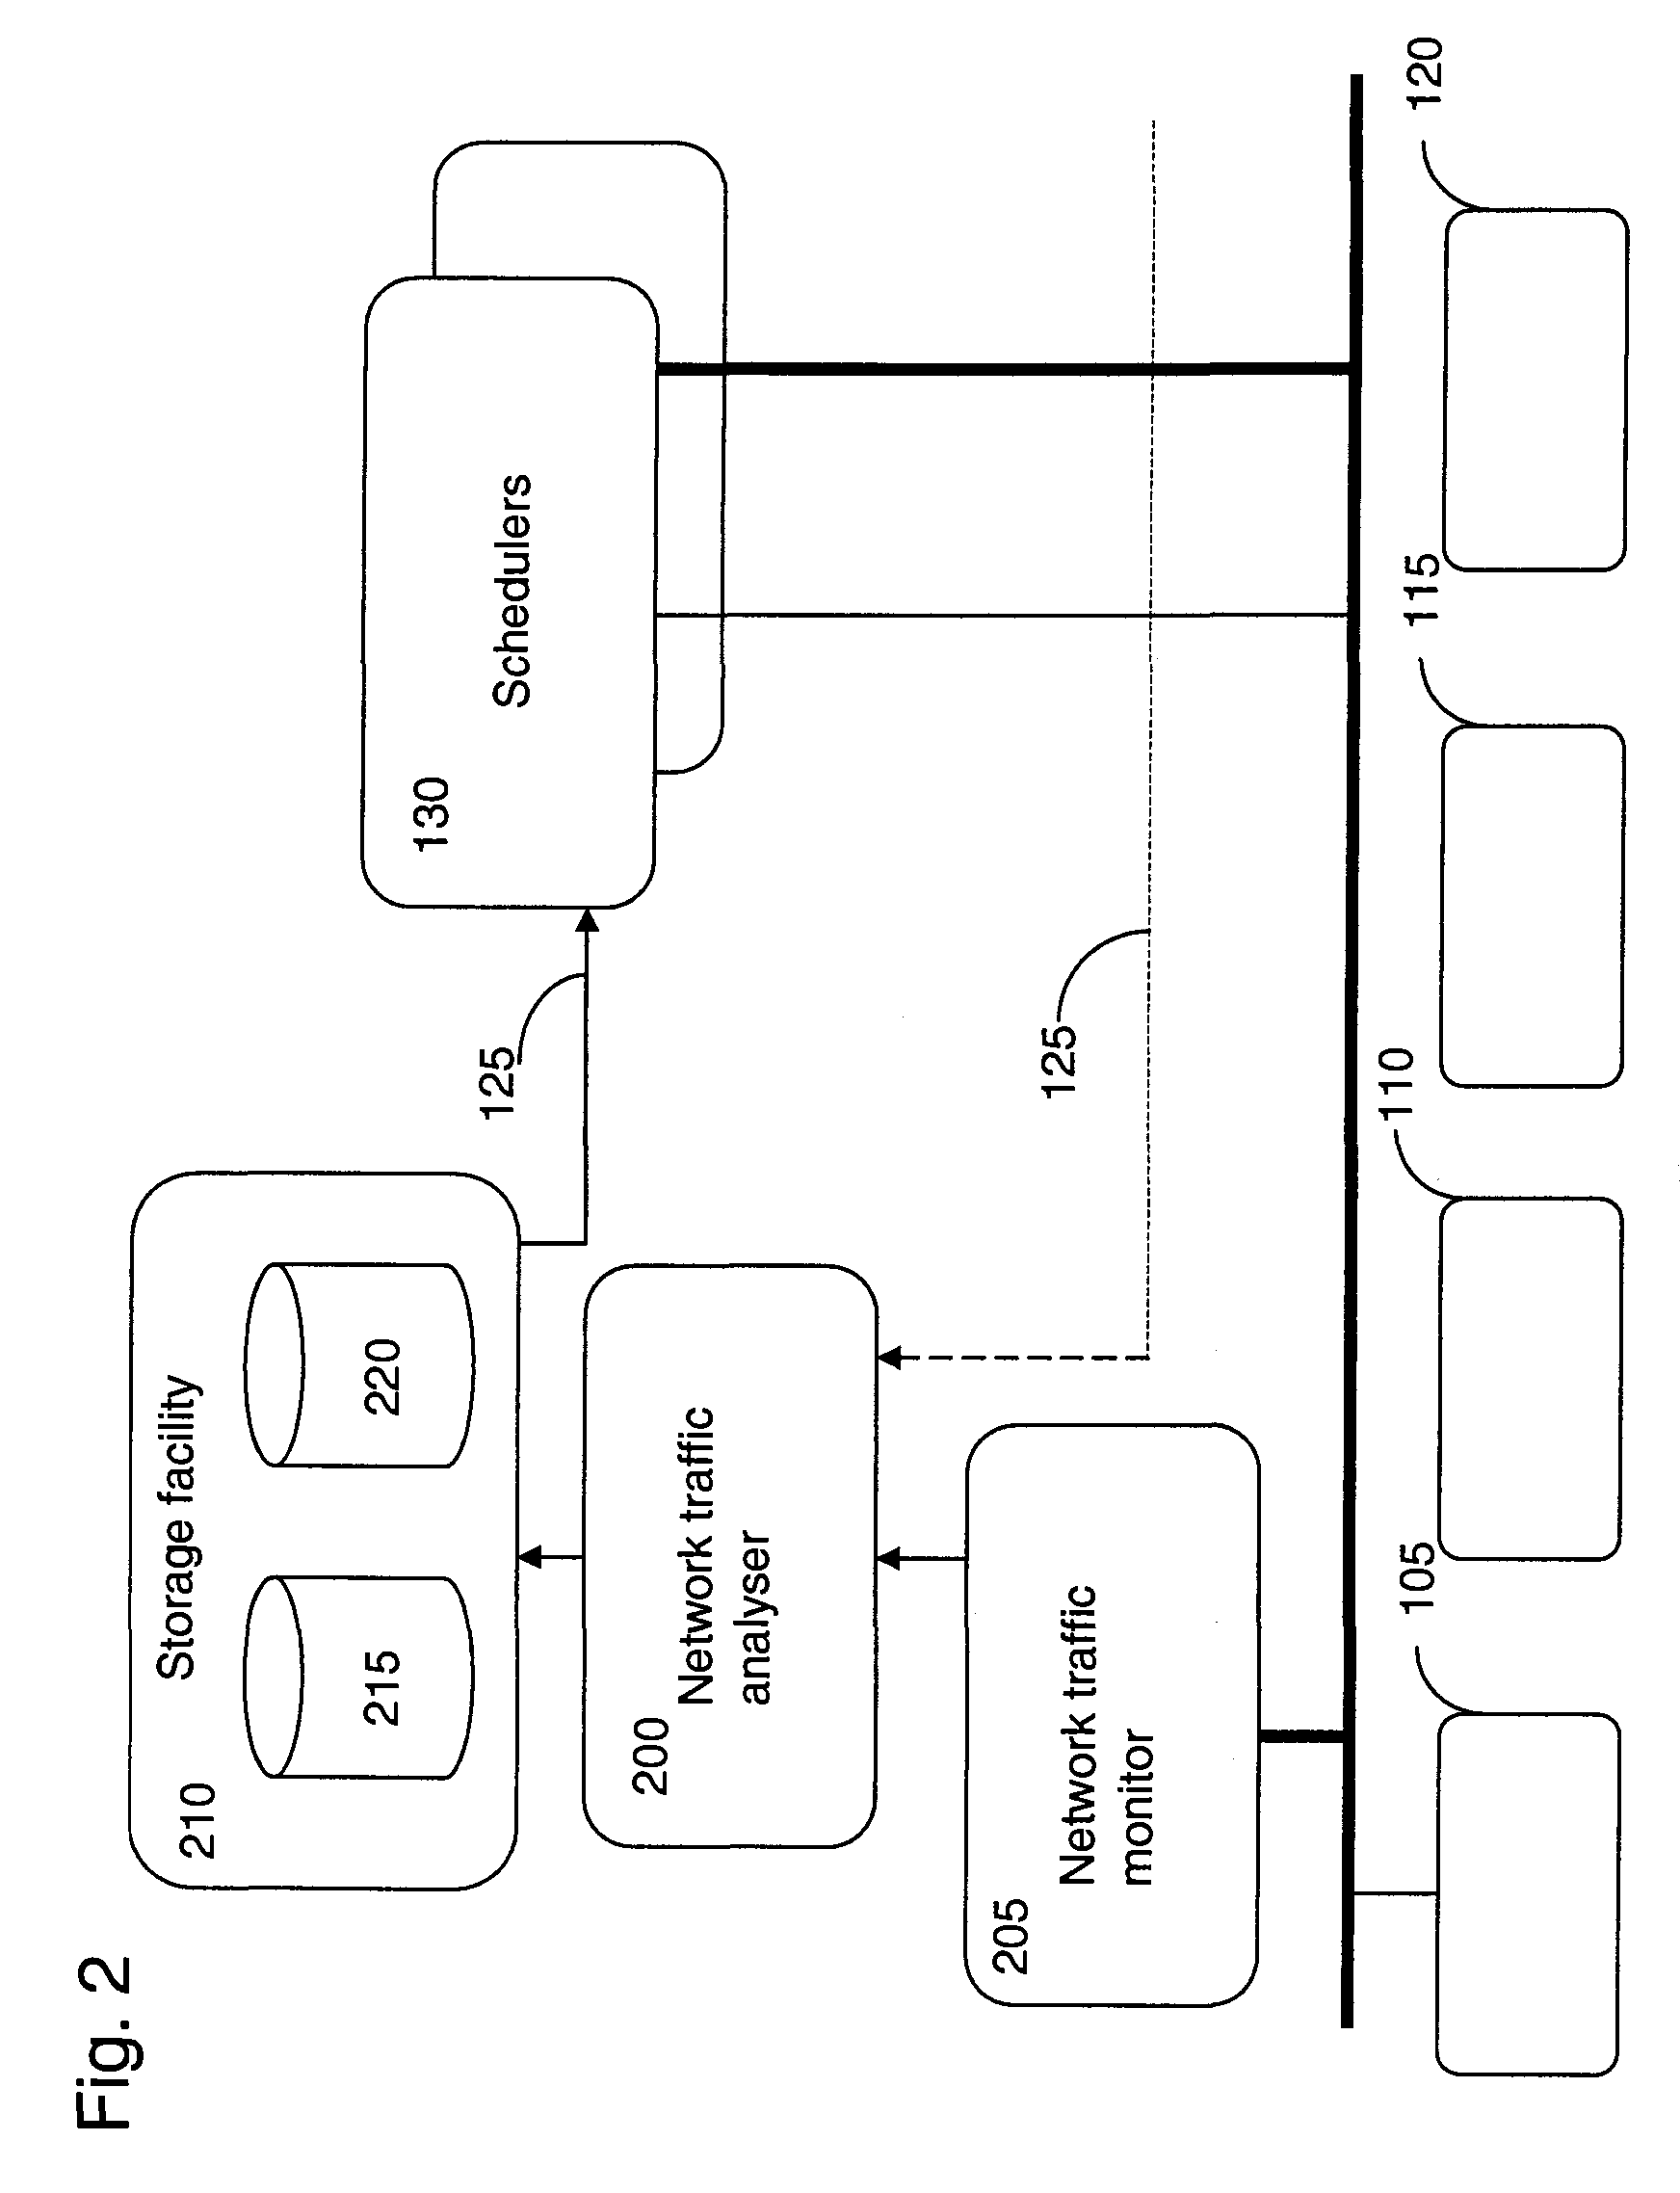 Method and system for determining a plurality of scheduling endpoints in a grid network